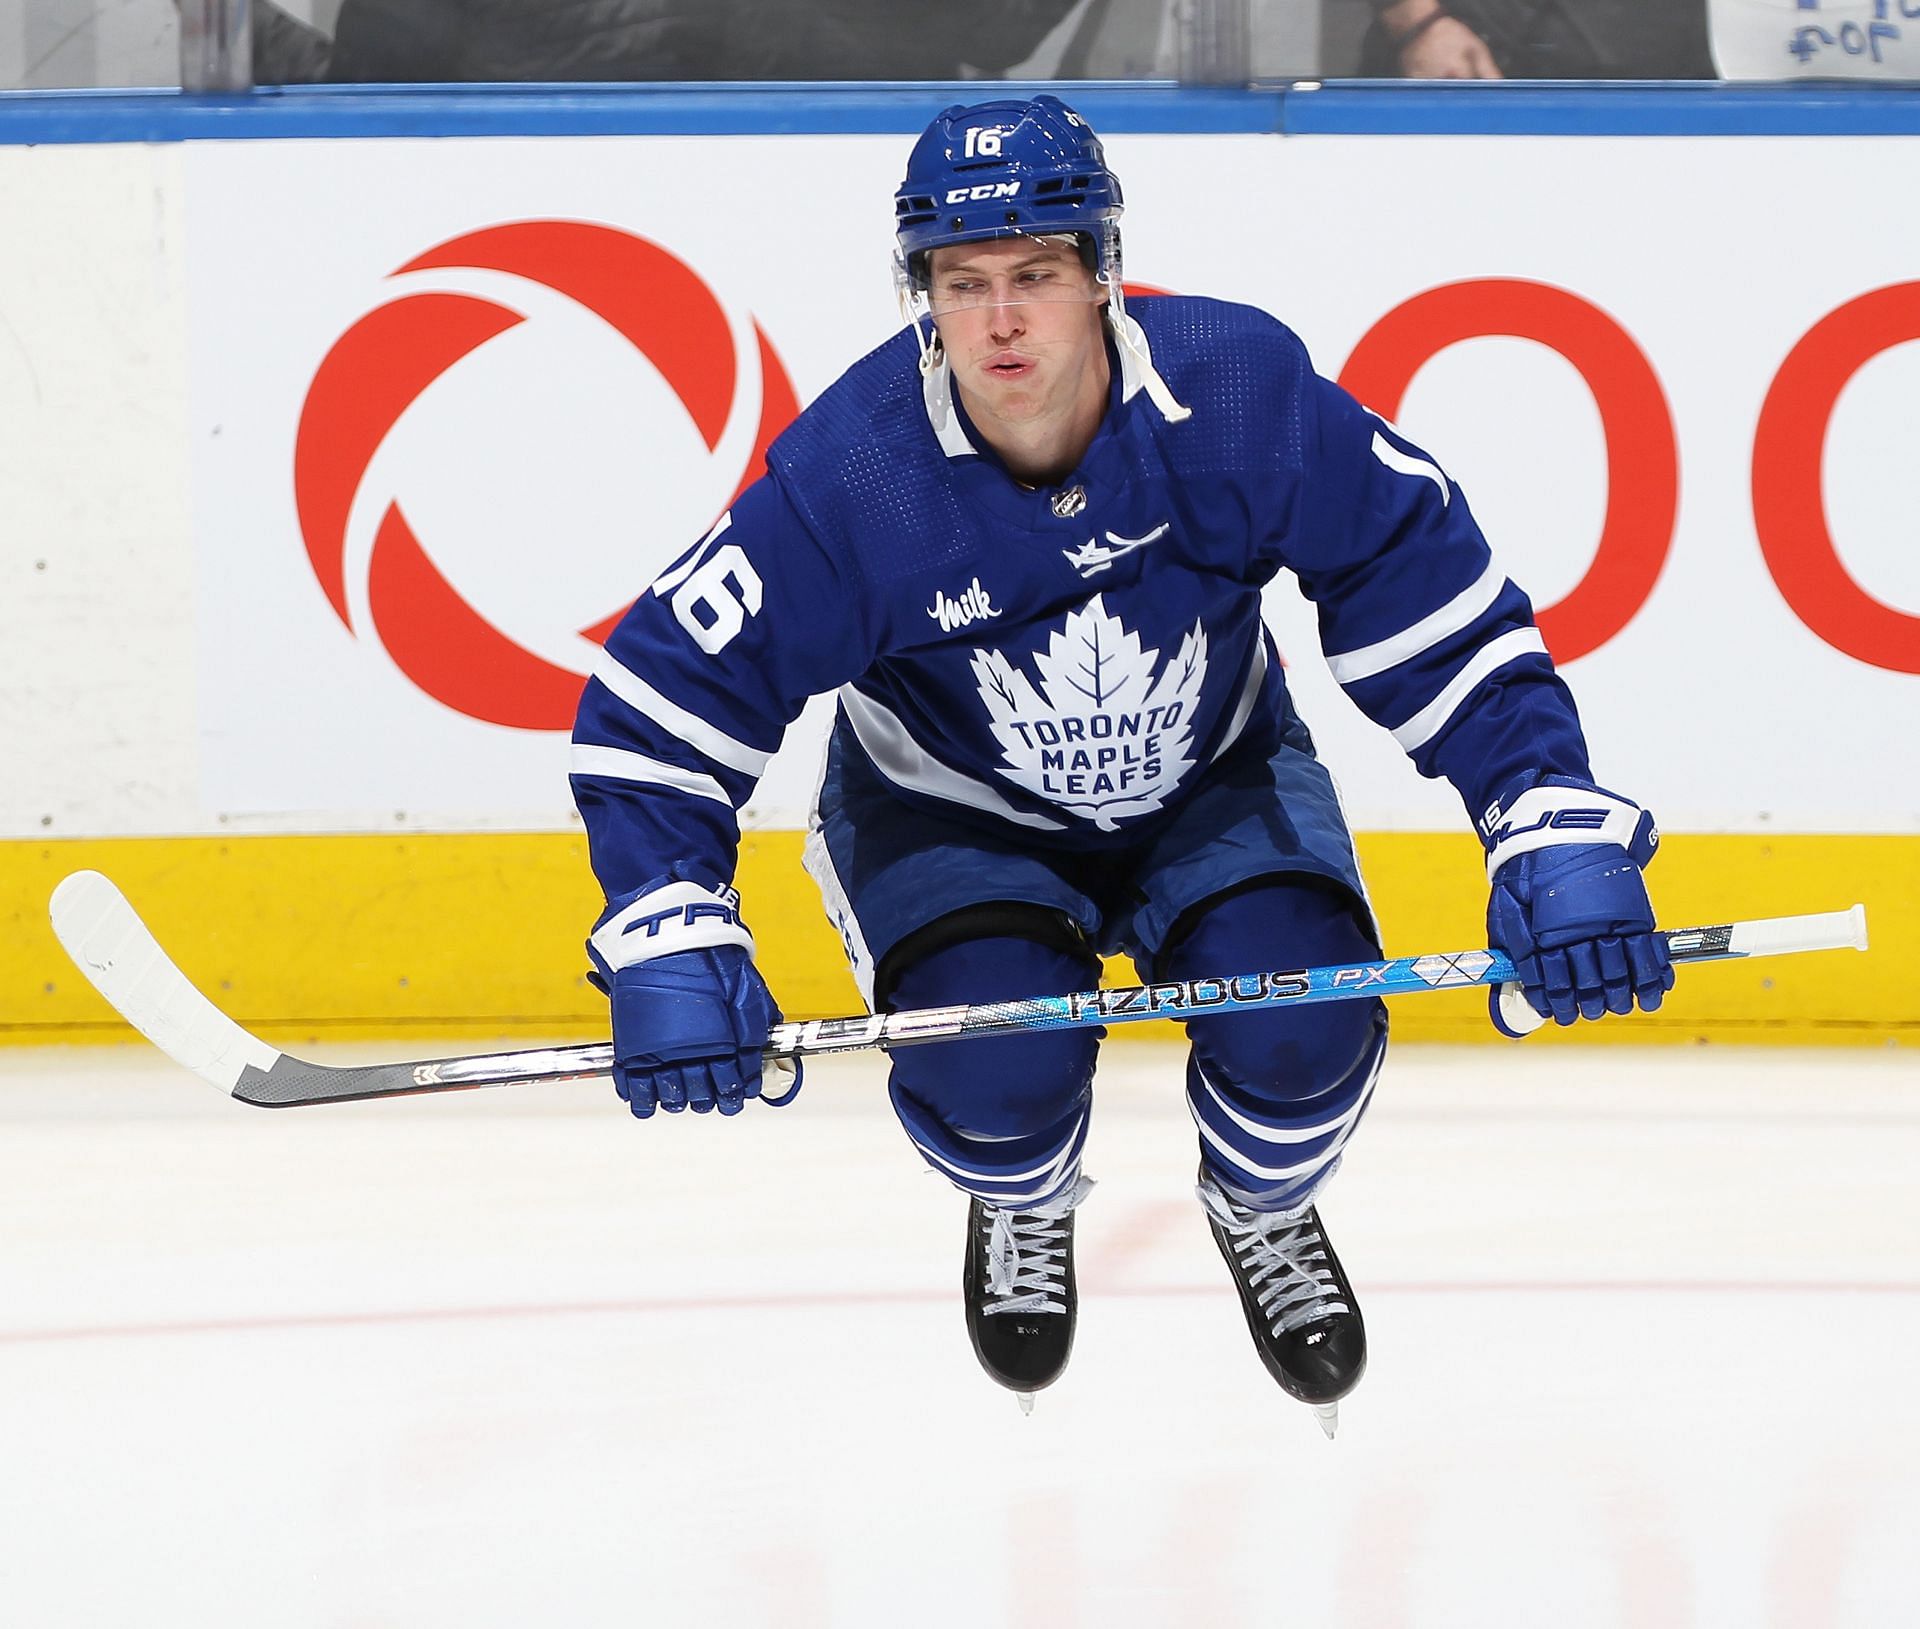 10 'first impressions' of the 2022-23 Toronto Maple Leafs